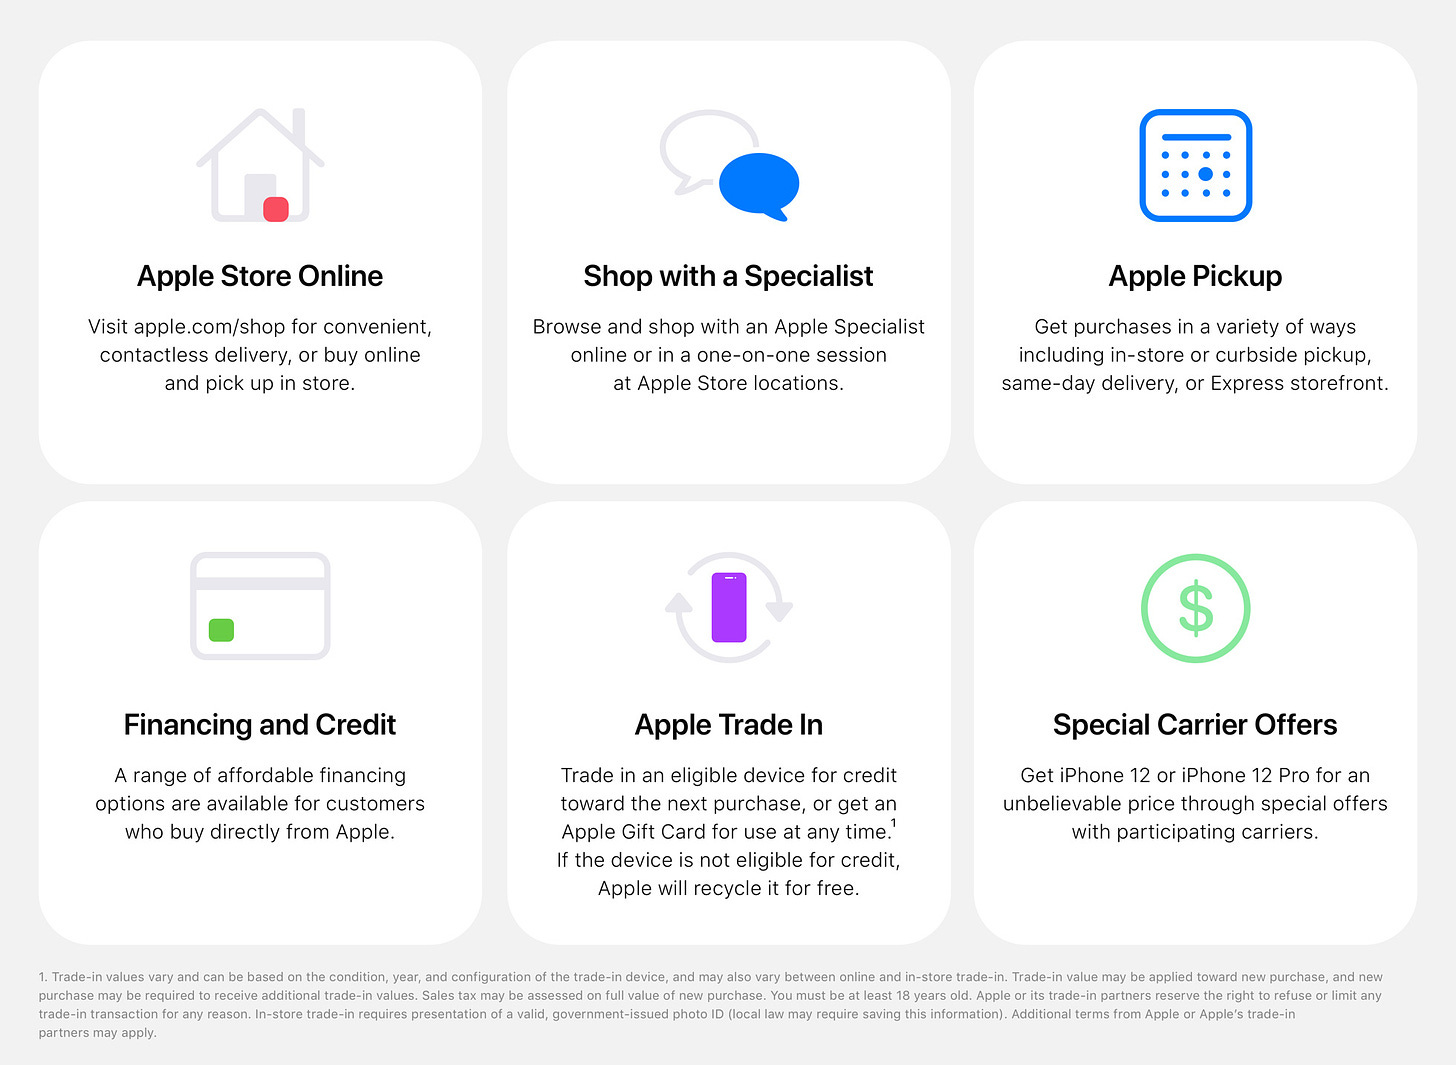 Apple_new-ways-to-shop-for-iPadAir-iPhone12Pro-iPhone12-infographic_10212020.jpg